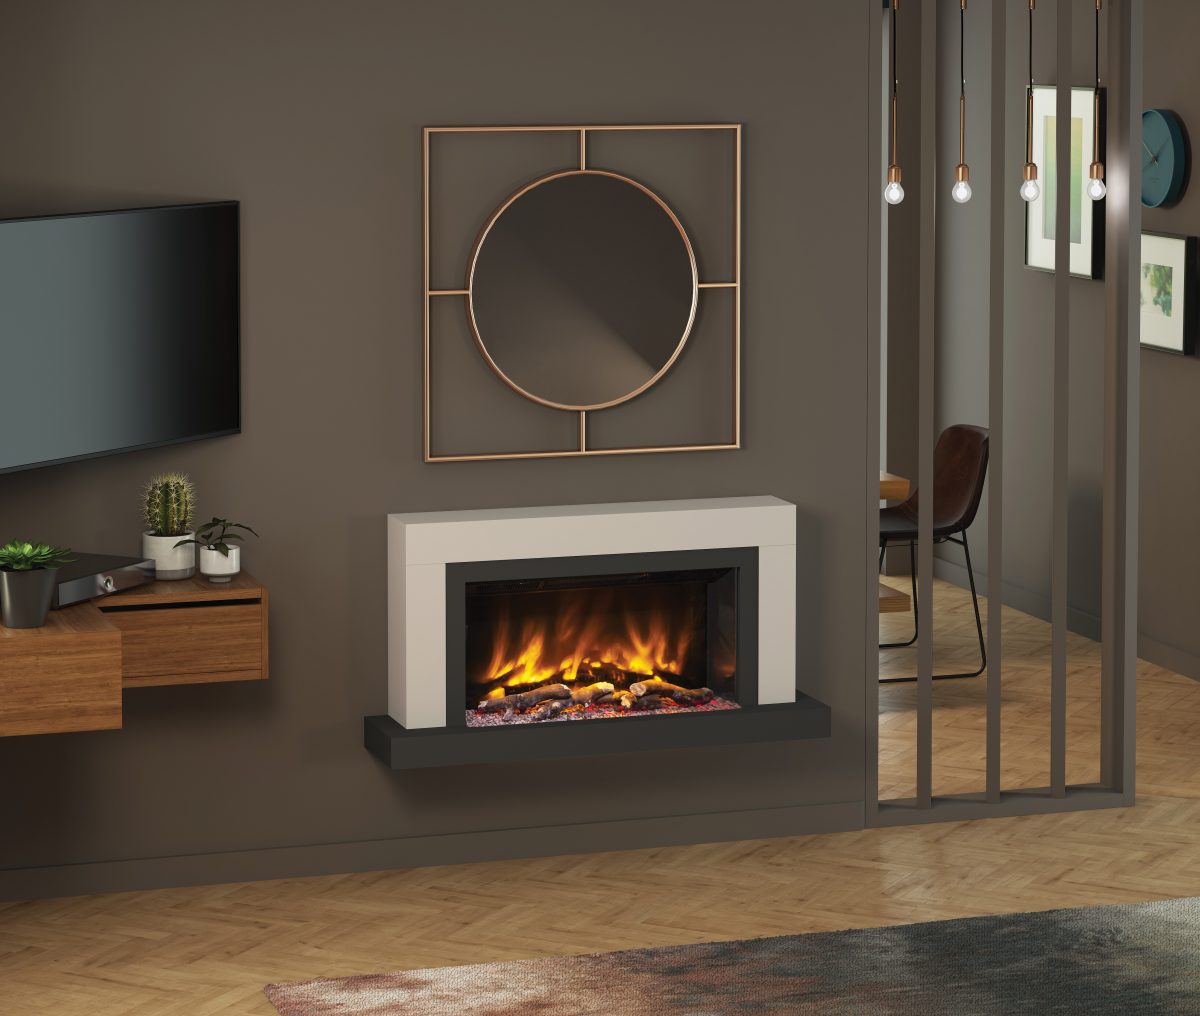 Elgin & Hall Pryzm 5D Electric Fire Vardo 47″ Wall Mounted Timber Suite in Cashmere & Anthracite